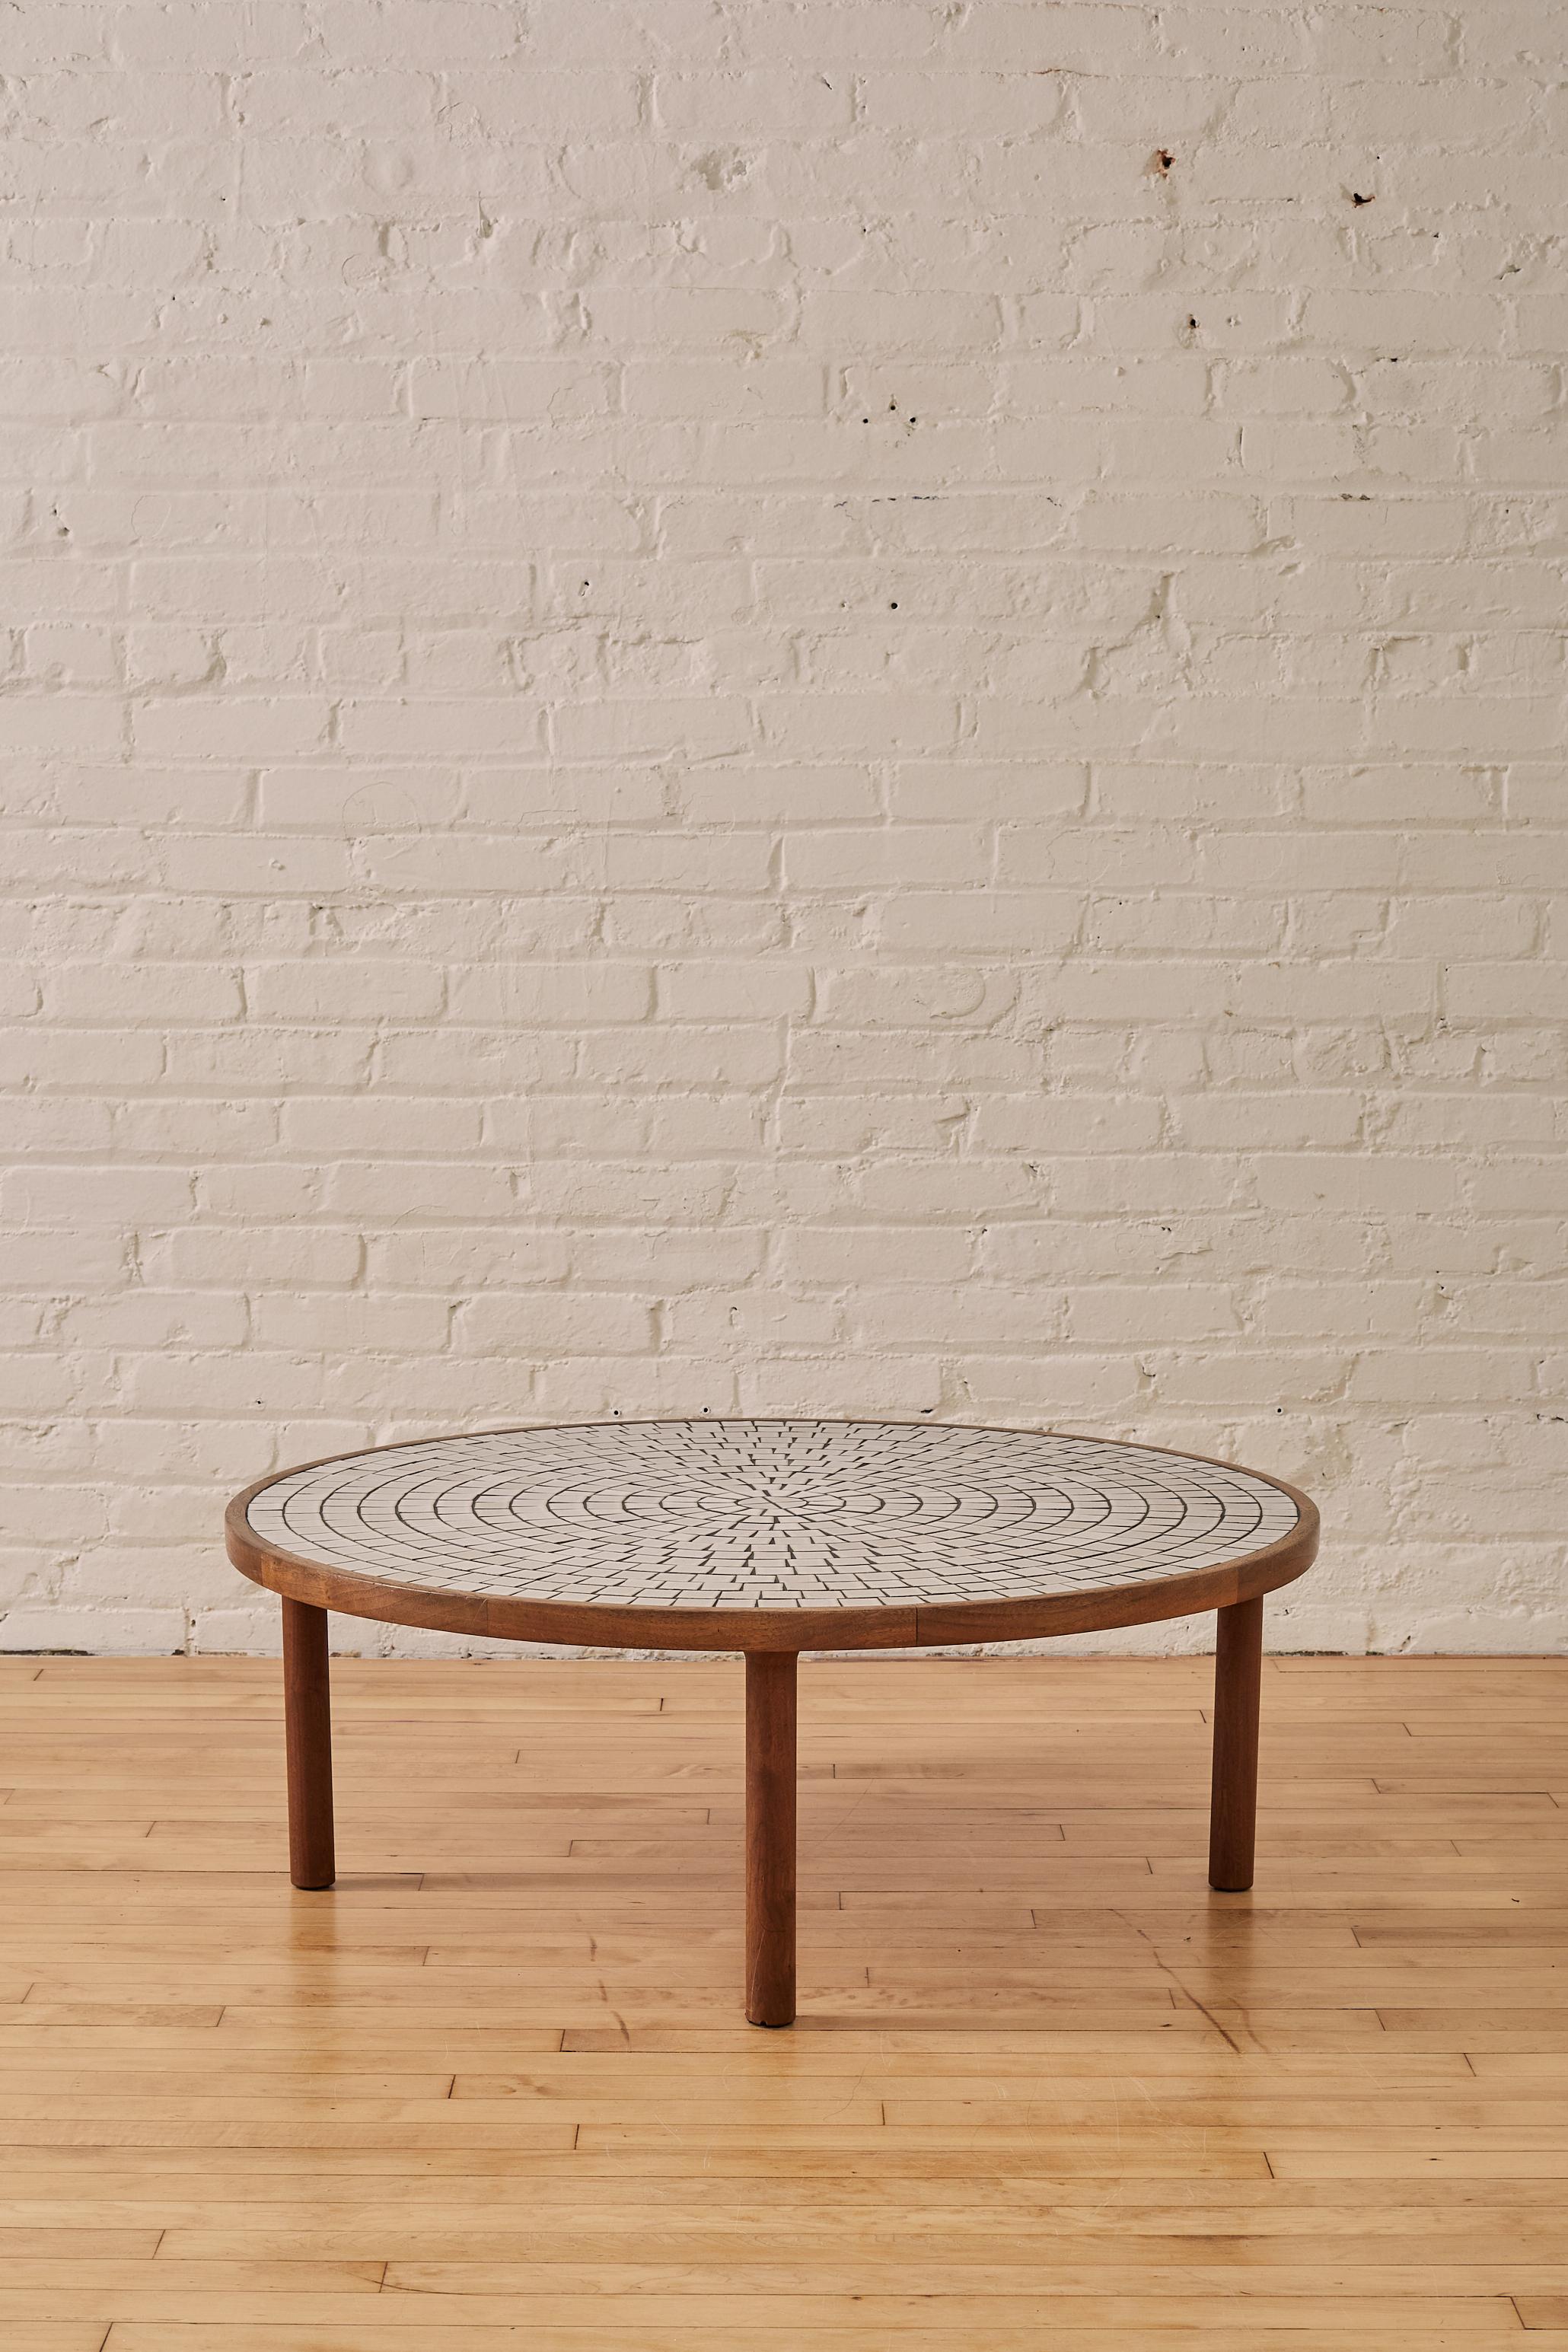 Tile Top Coffee Table by Jane & Gordon Martz on Teak legs

About Jane and Gordon Martz:

Gordon (1924 - 2015)  and Jane Martz (1929 - 2007) both studied at the New York State College of Ceramics at Alfred University and also met there. After